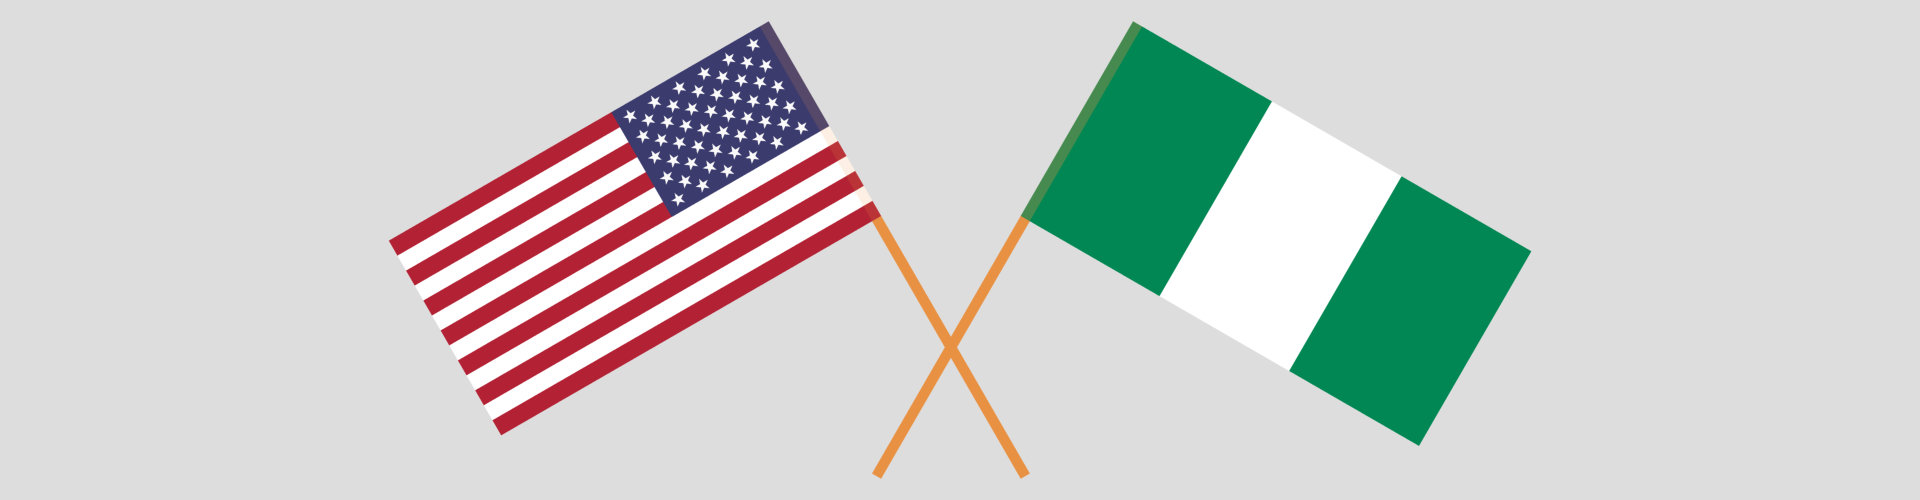 Crossed flags of Nigeria and the USA